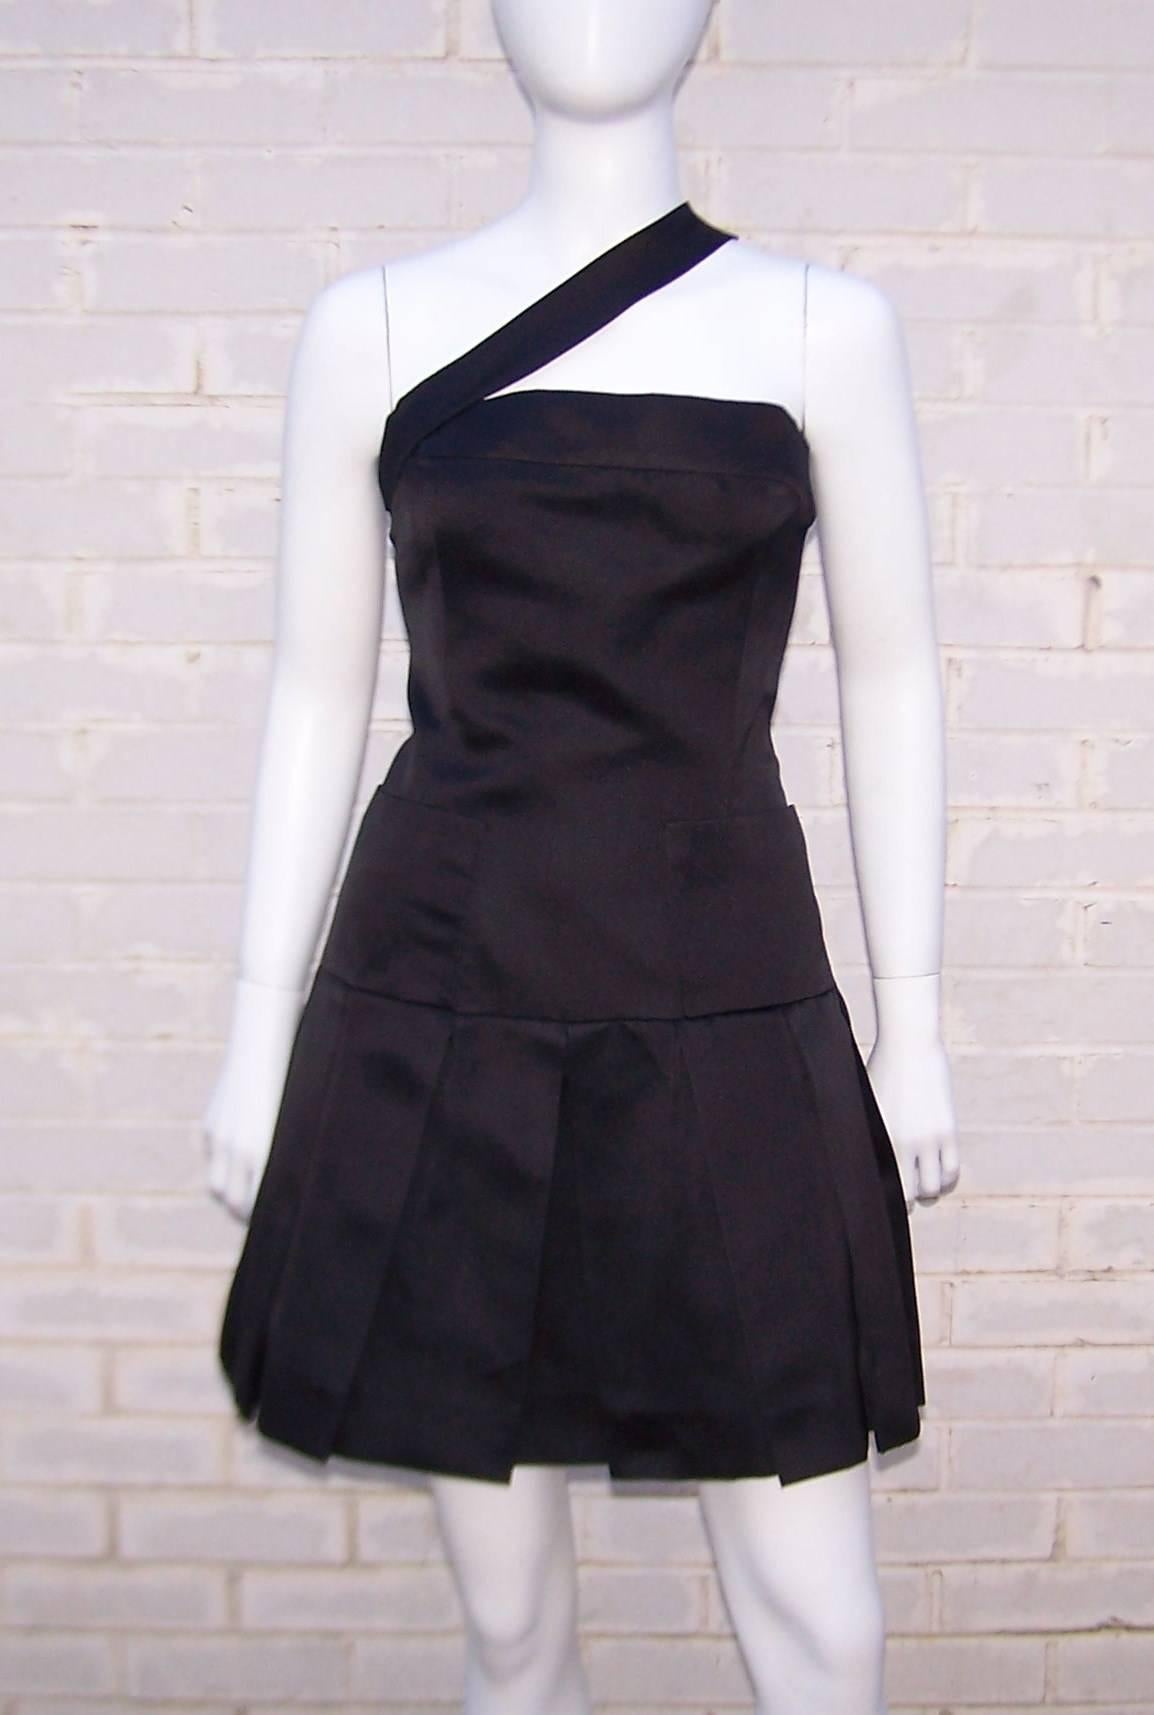 This adorable dress appears to be Chanel's take on a black tie pinafore ... with a good dose of class and style, of course.  The unique design features a wide asymmetrical strap supporting the fitted bodice which yields to a drop waist and box